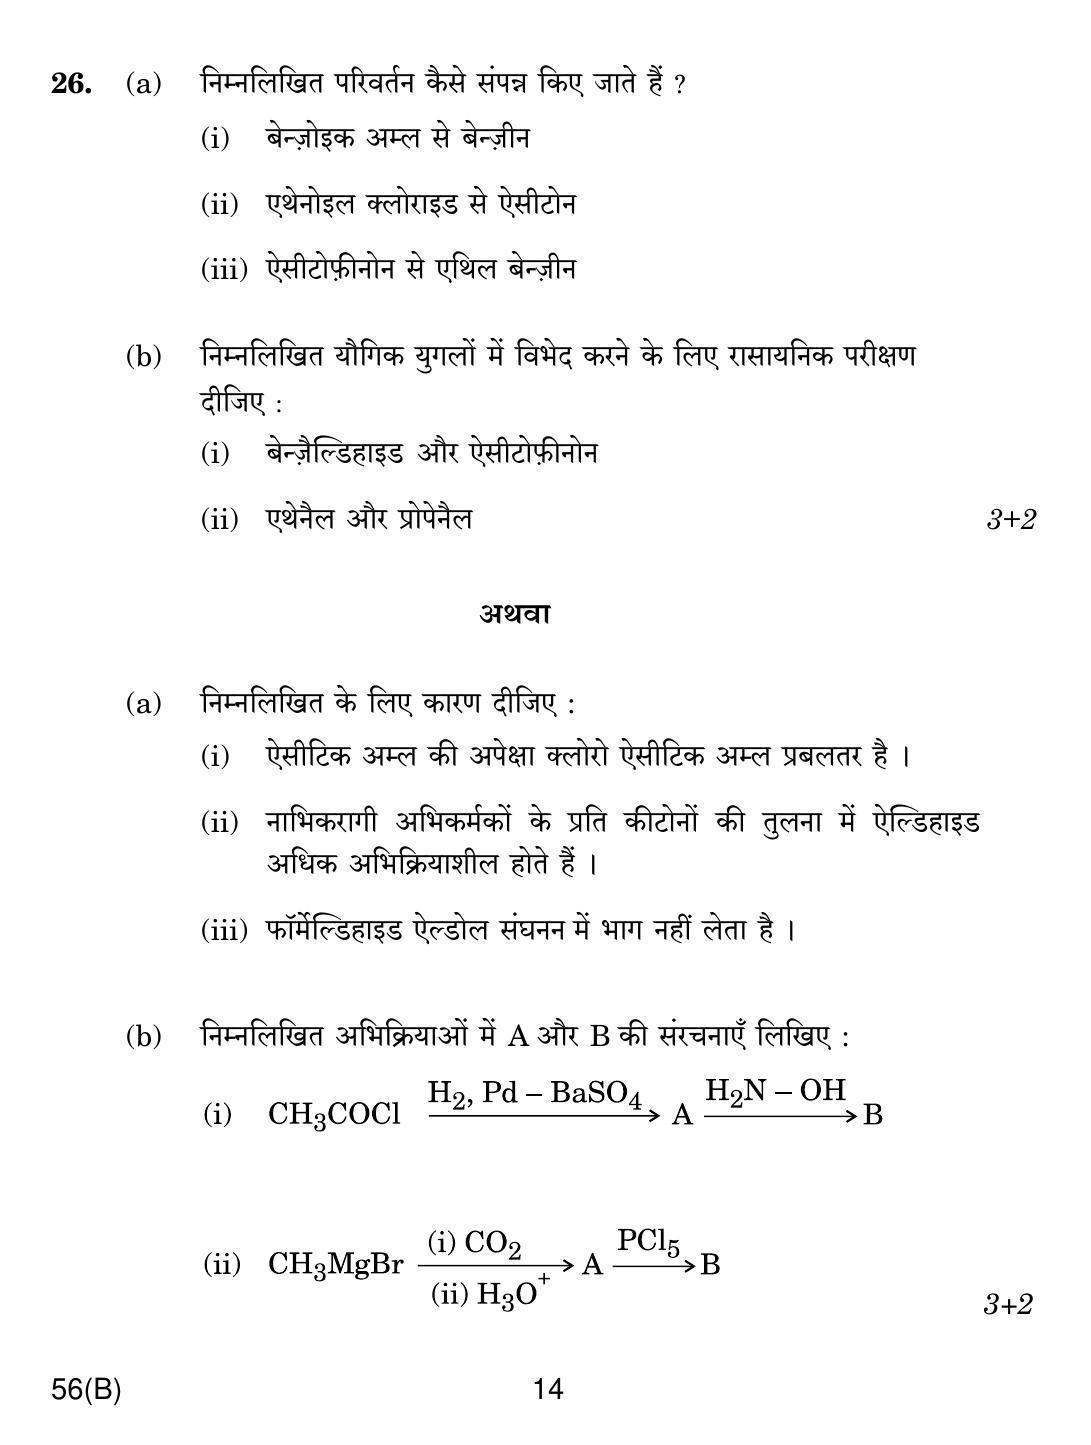 CBSE Class 12 56(B) CHEMISTRY FOR BLIND CANDIDATES 2018 Question Paper - Page 14